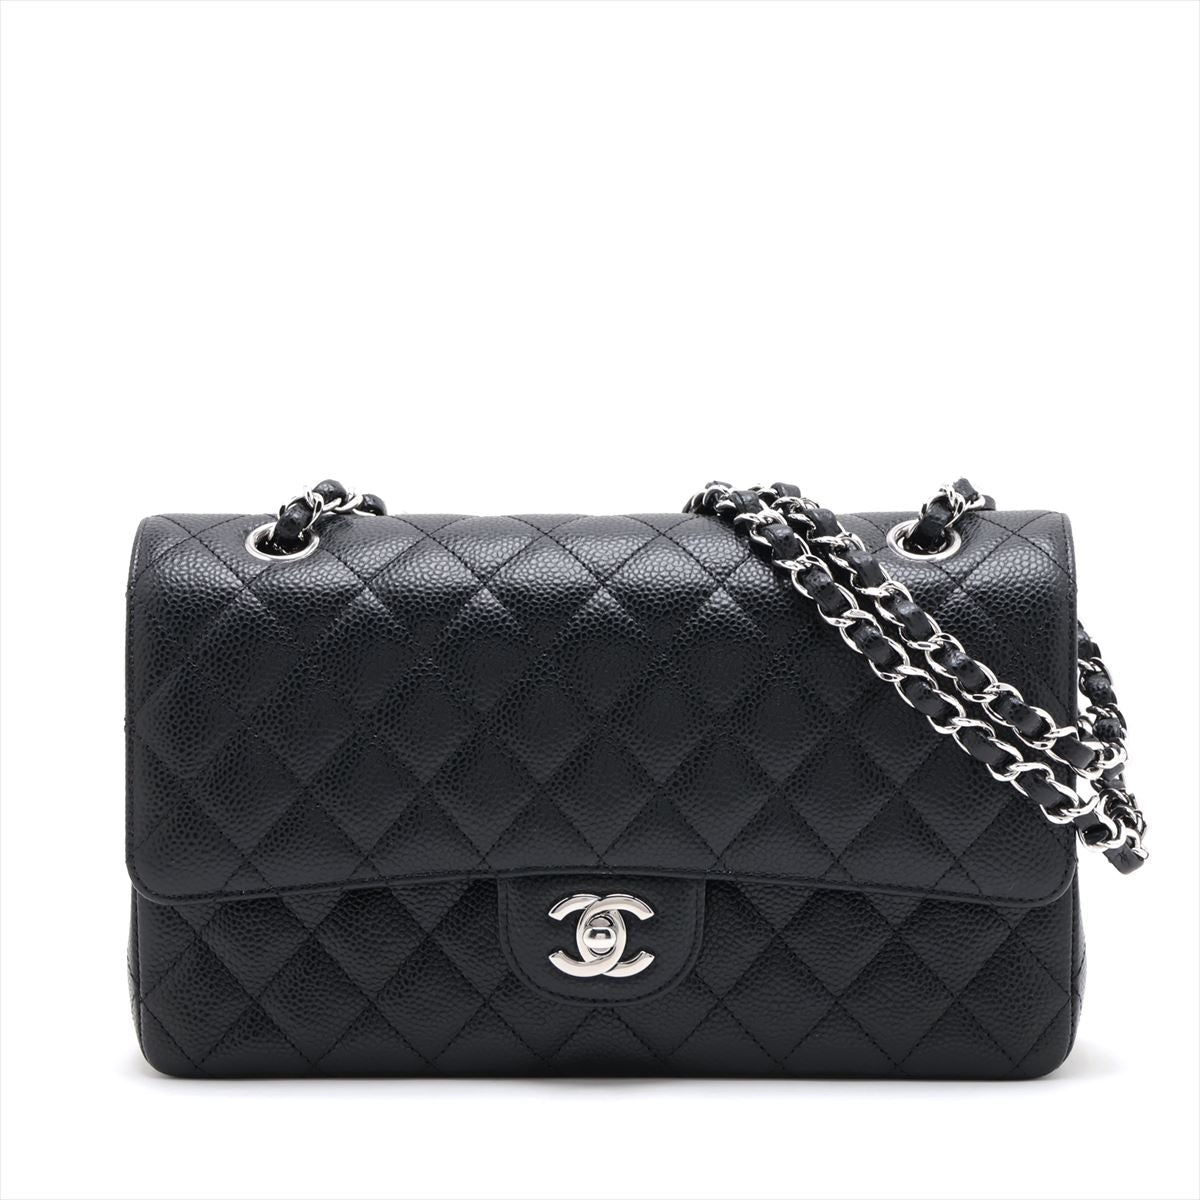 Chanel Matelasse25 Caviarskin Double flap Double chain bag Black Silver Metal fittings A01112